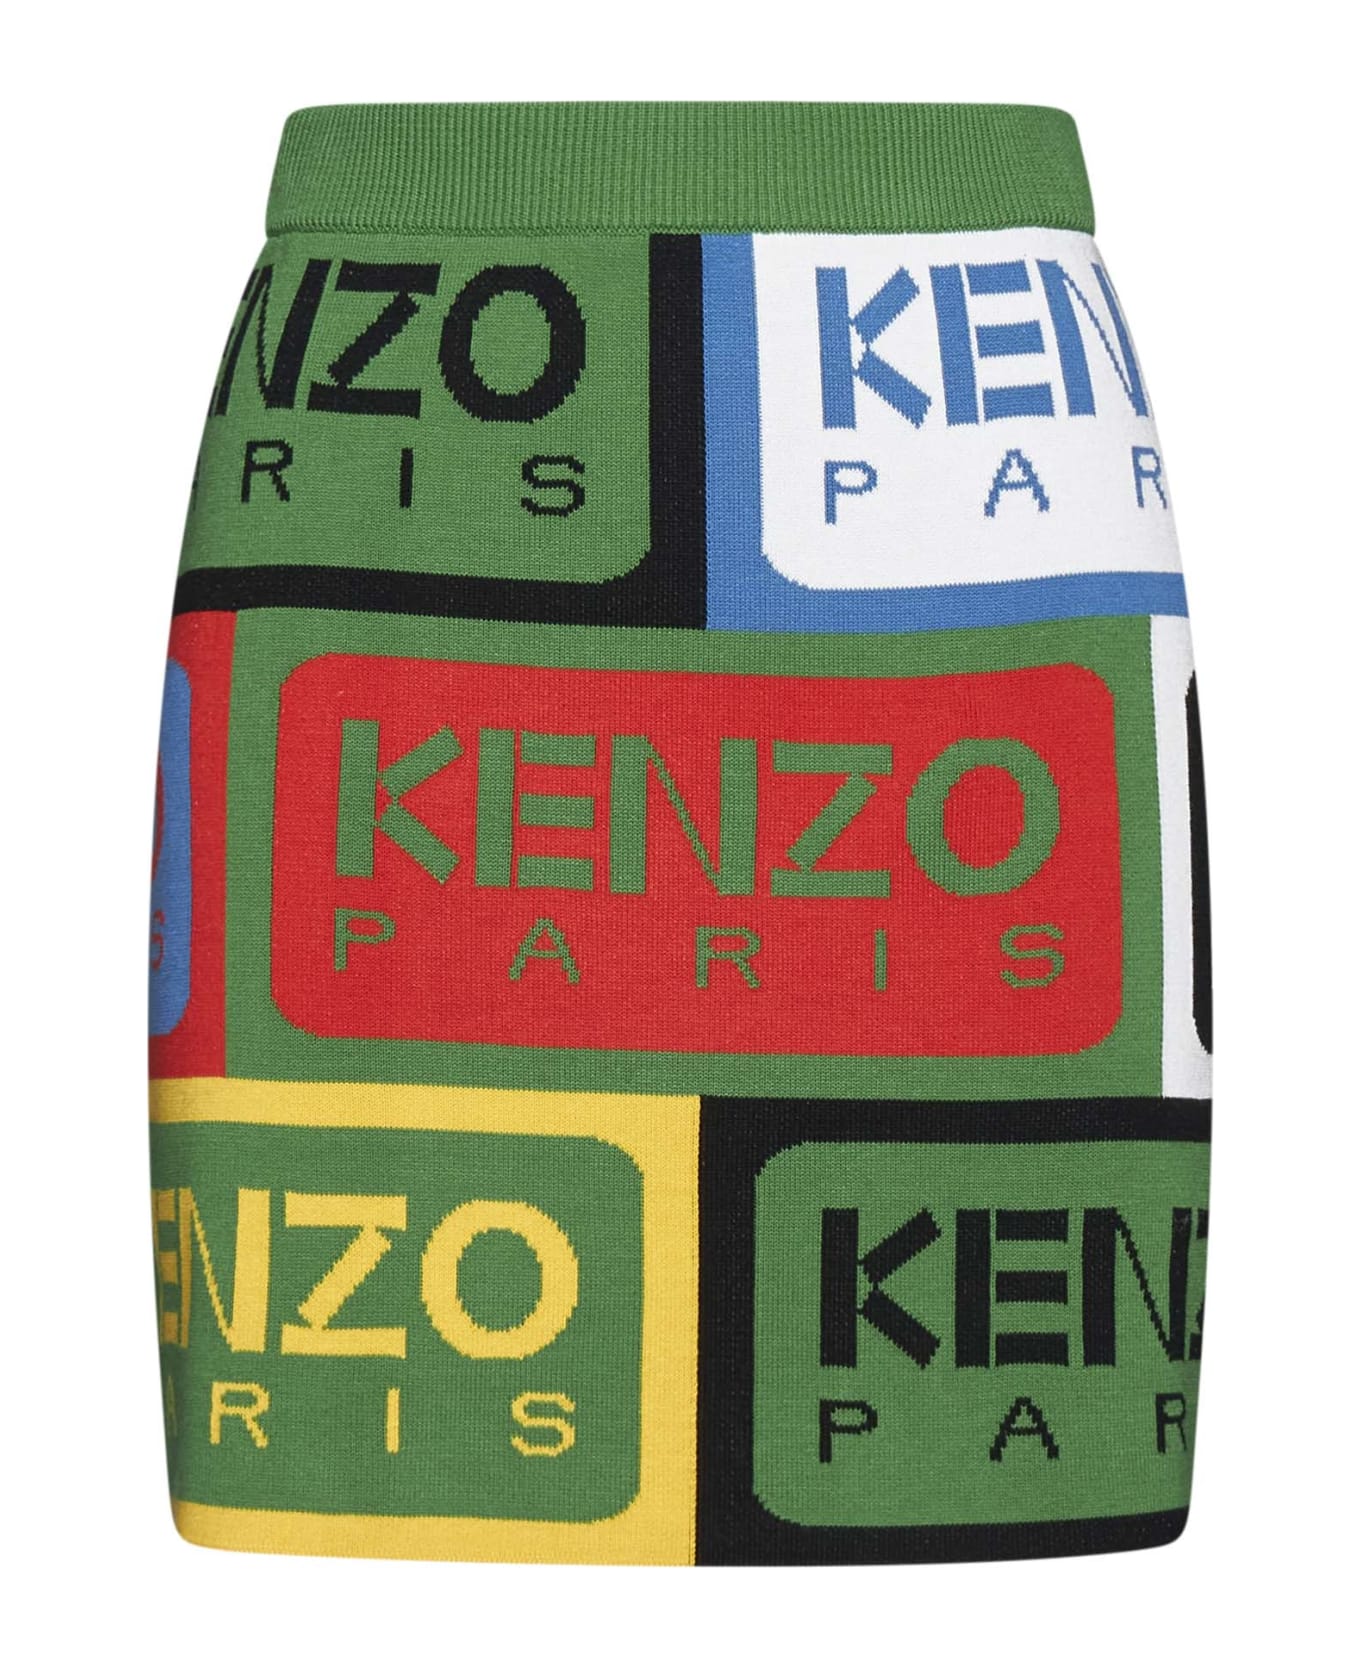 Kenzo Skirt - T-shirts manches courtes Cabin